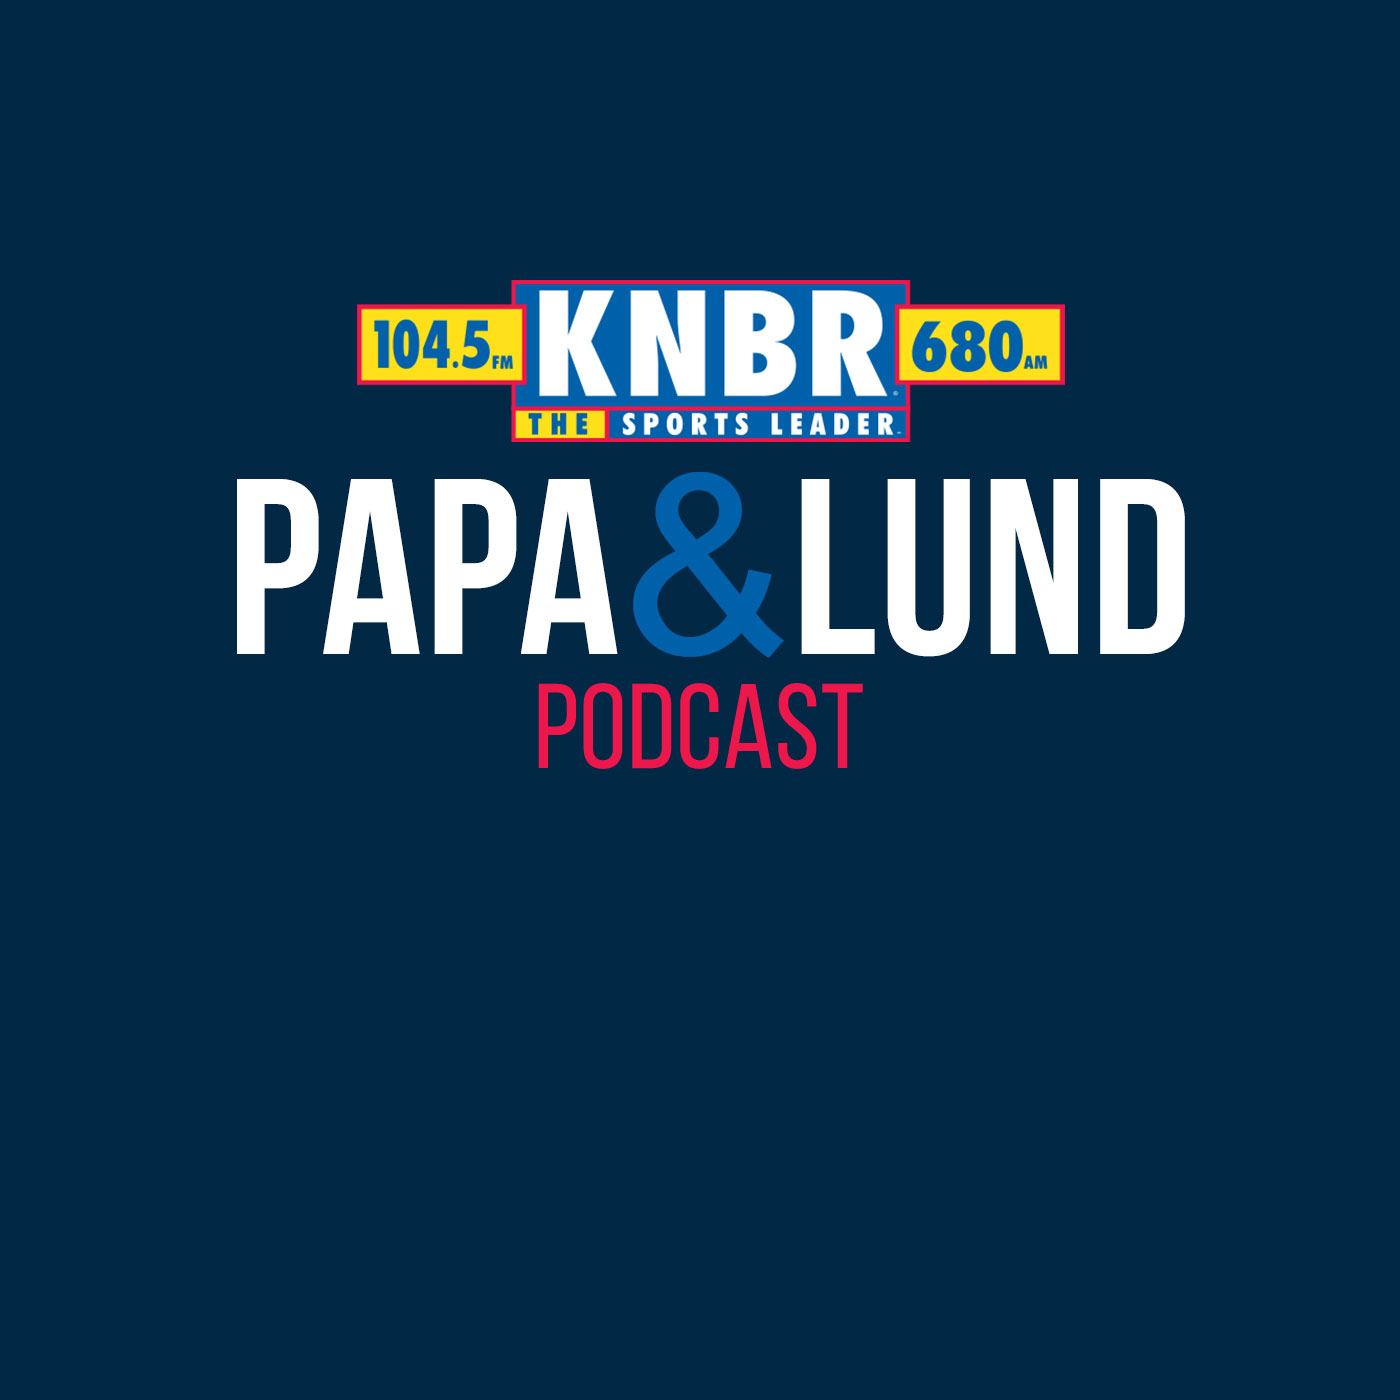 3-15 Matt Barrows joins Papa & Lund to talk the latest 49ers signings including Jason Verett & Kyle Juszczyk